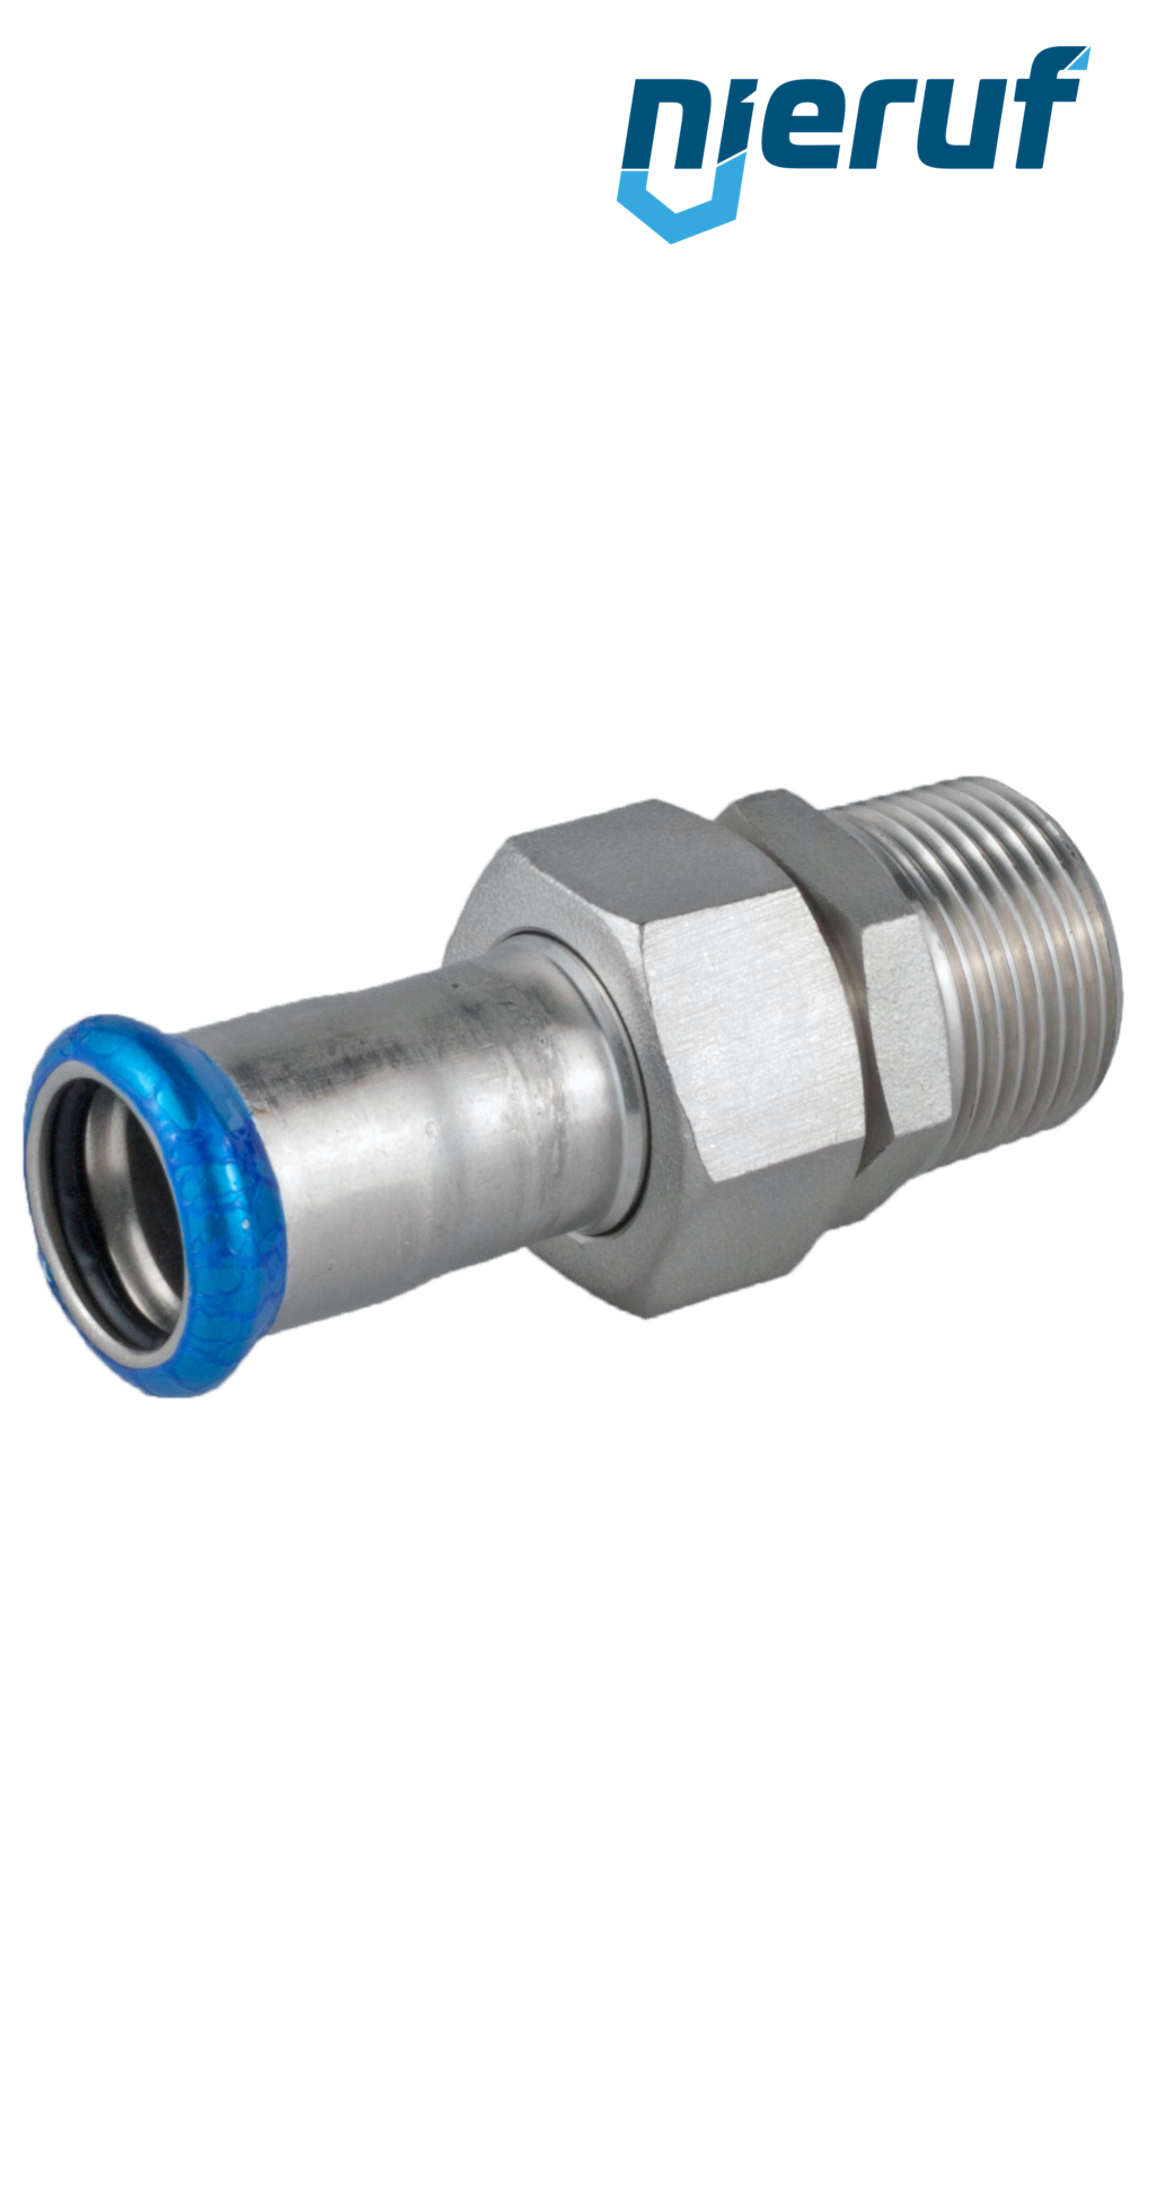 Union Coupling Pressfitting F DN20 - 22,0 mm male thread 1" inch stainless steel